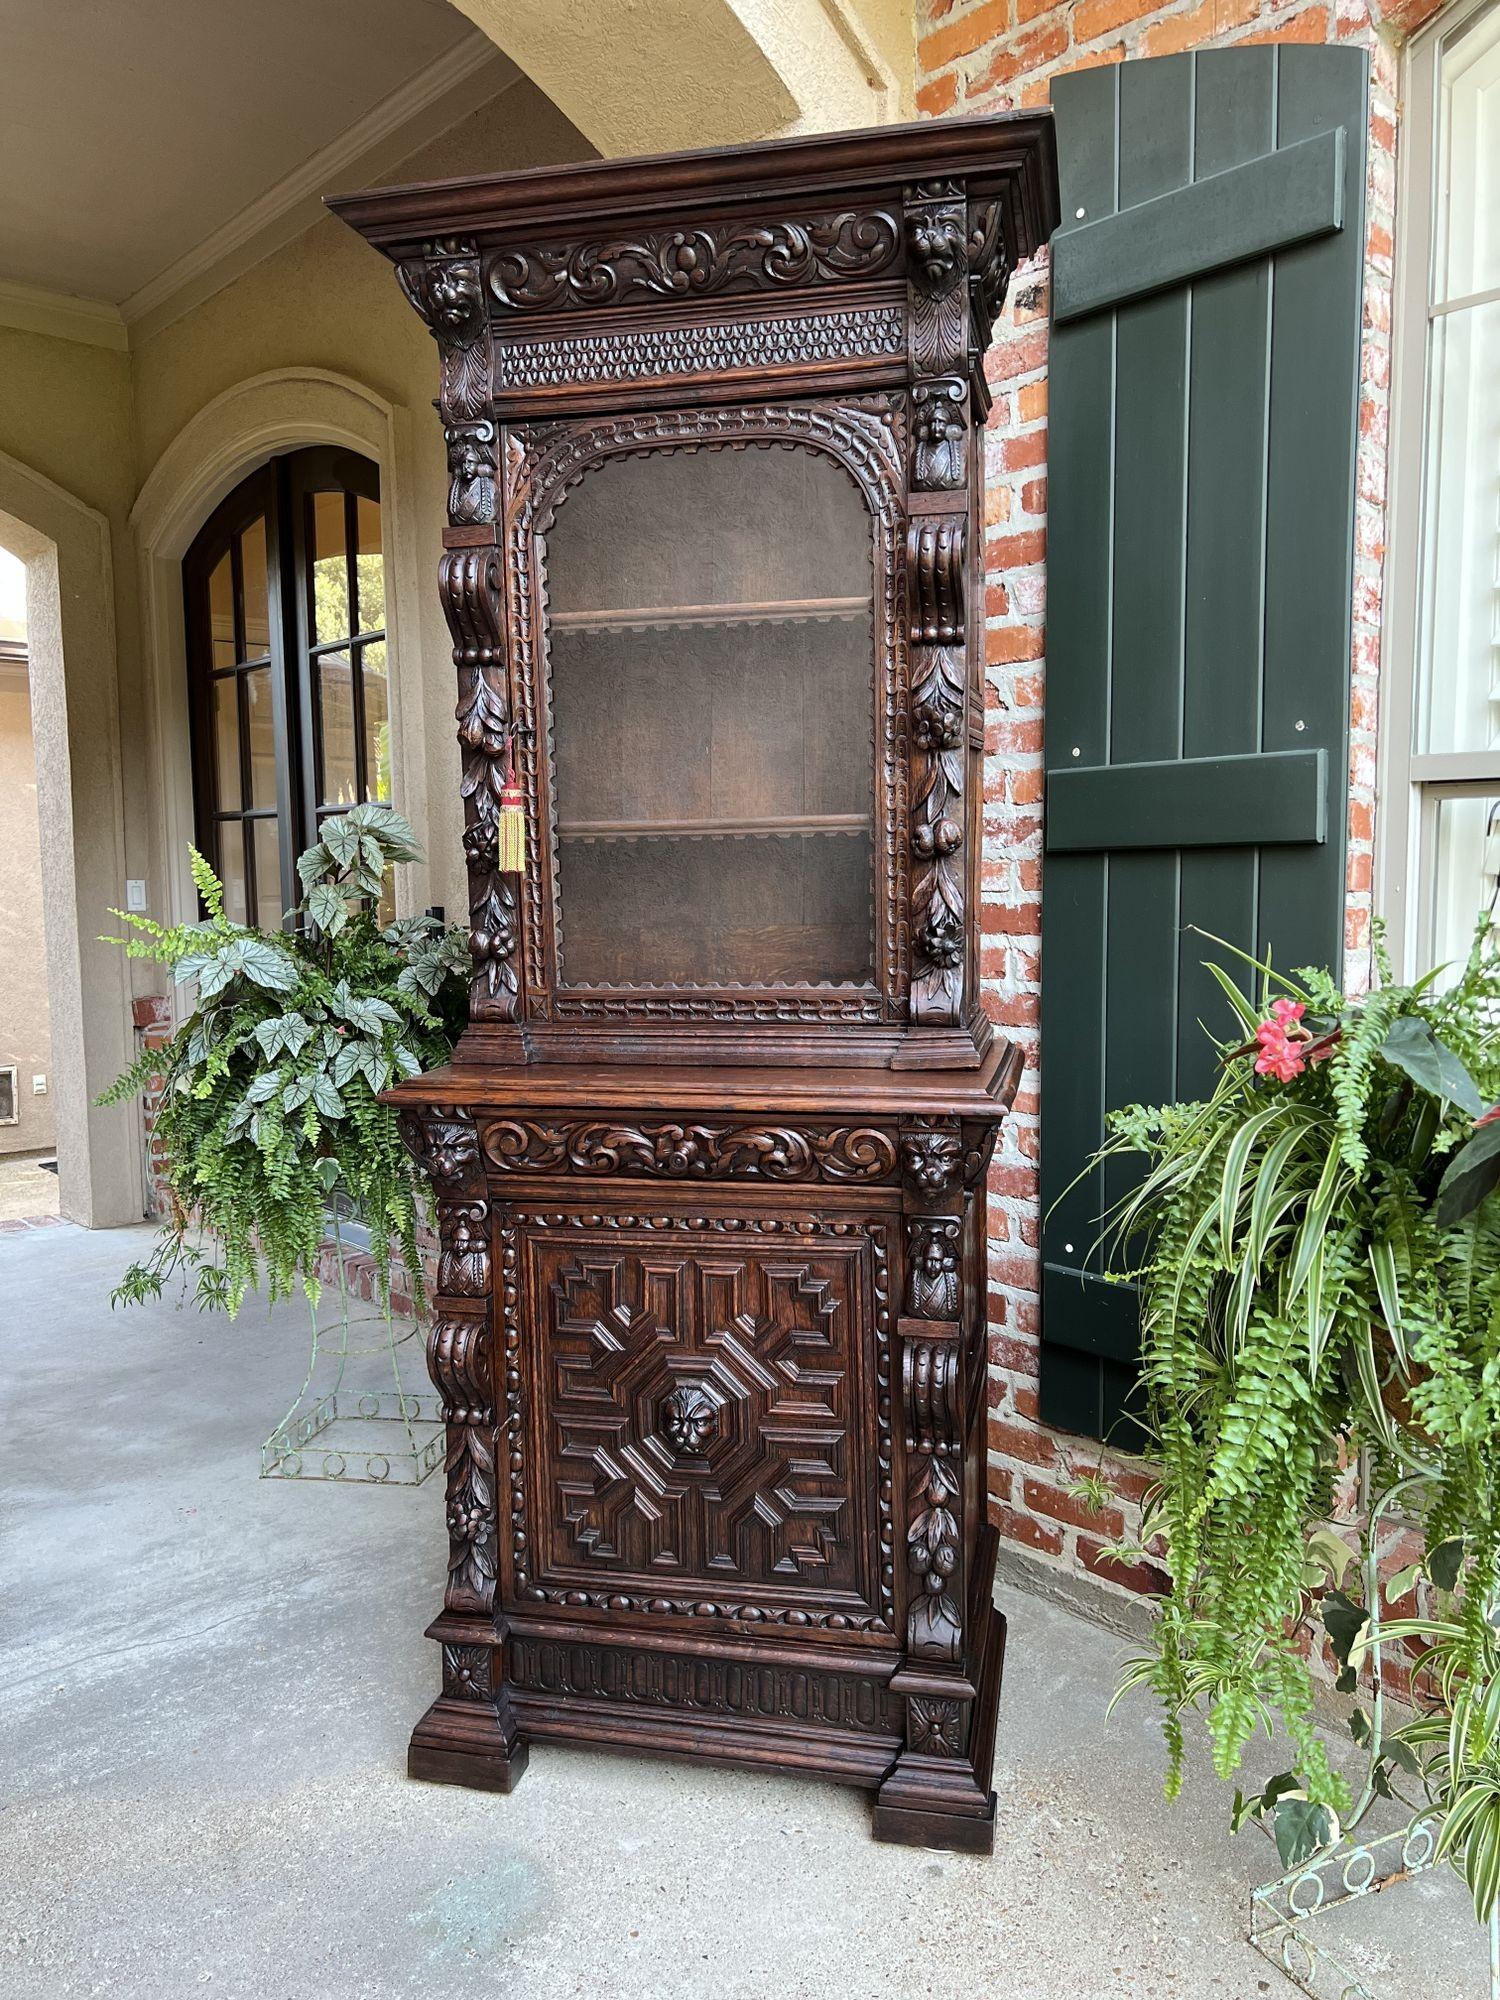 Superb 19th century antique French dark oak “Hunt Cabinet”, Bookcase, Vitrine or Display Cabinet!
 
Direct from France, and one of several exquisite glass door bookcase/cabinets from our most recent container. Wonderfully hand carved oak pieces in